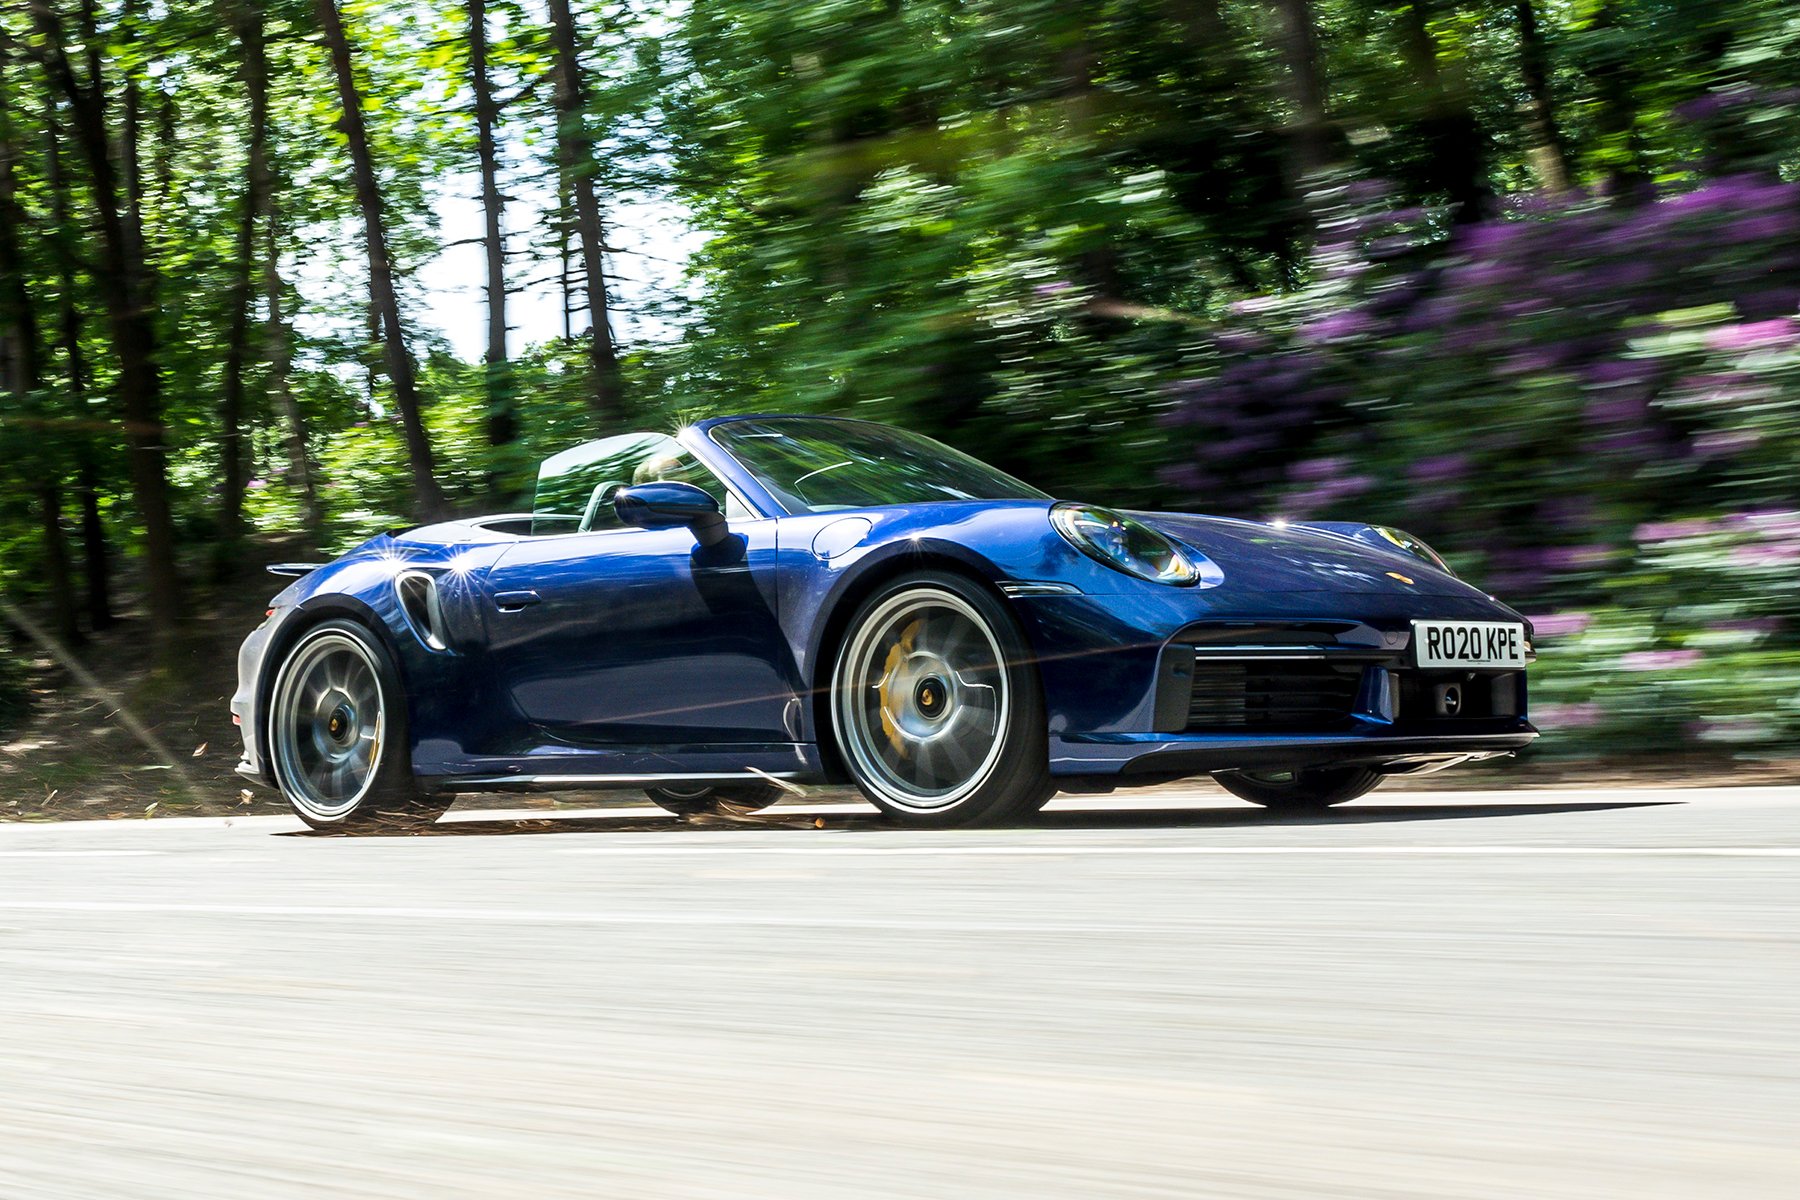 Porsche 911 Turbo cabriolet front view | Expert Rating